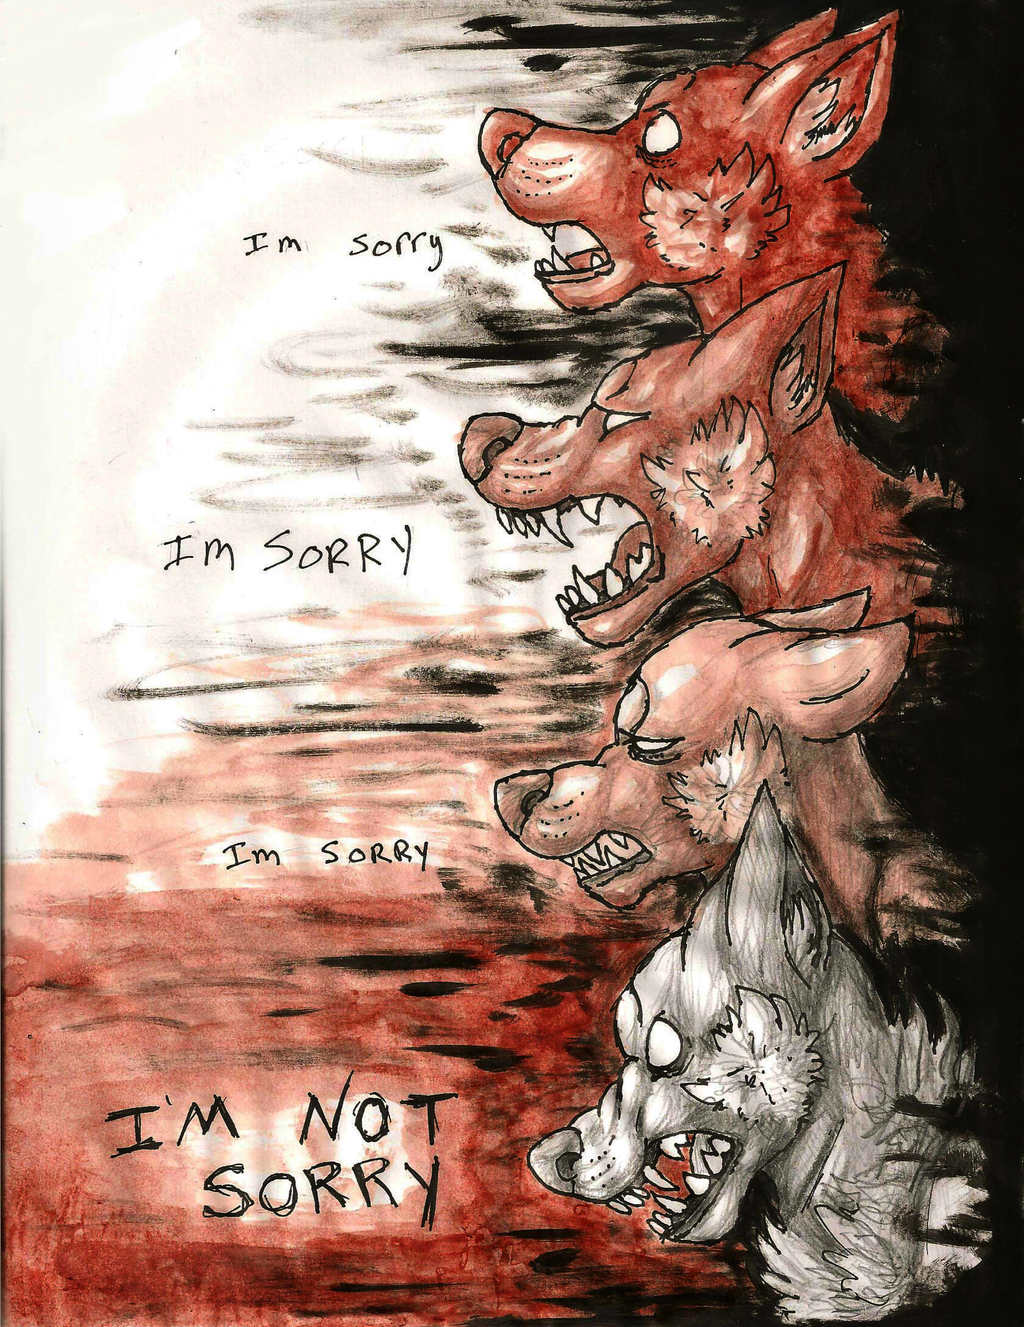 Most recent image: "sorry"